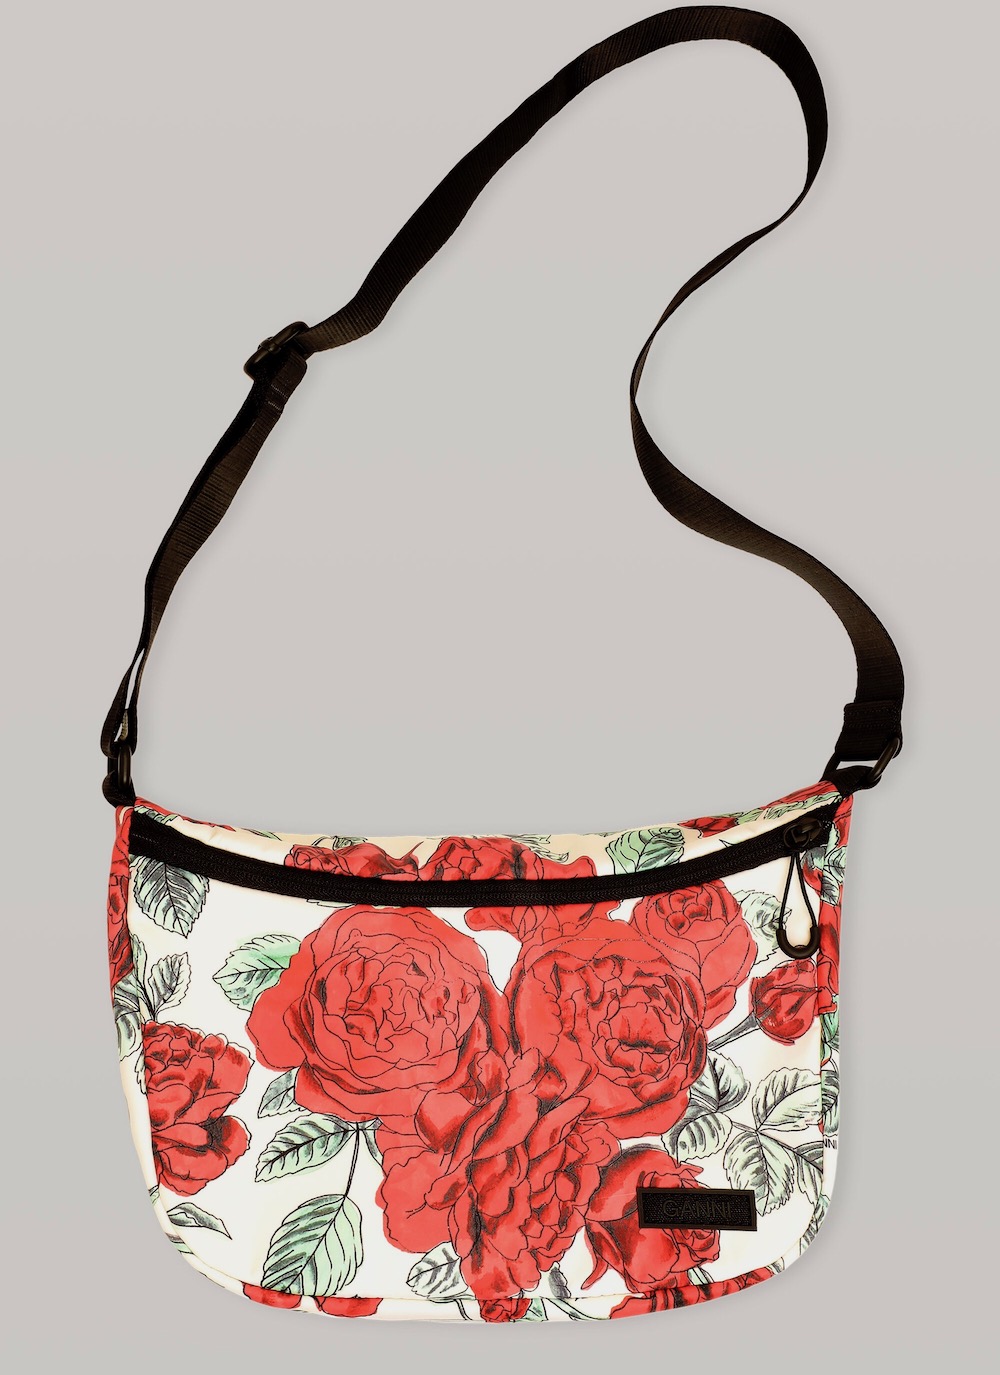 Floral Bags 2021 Update #12